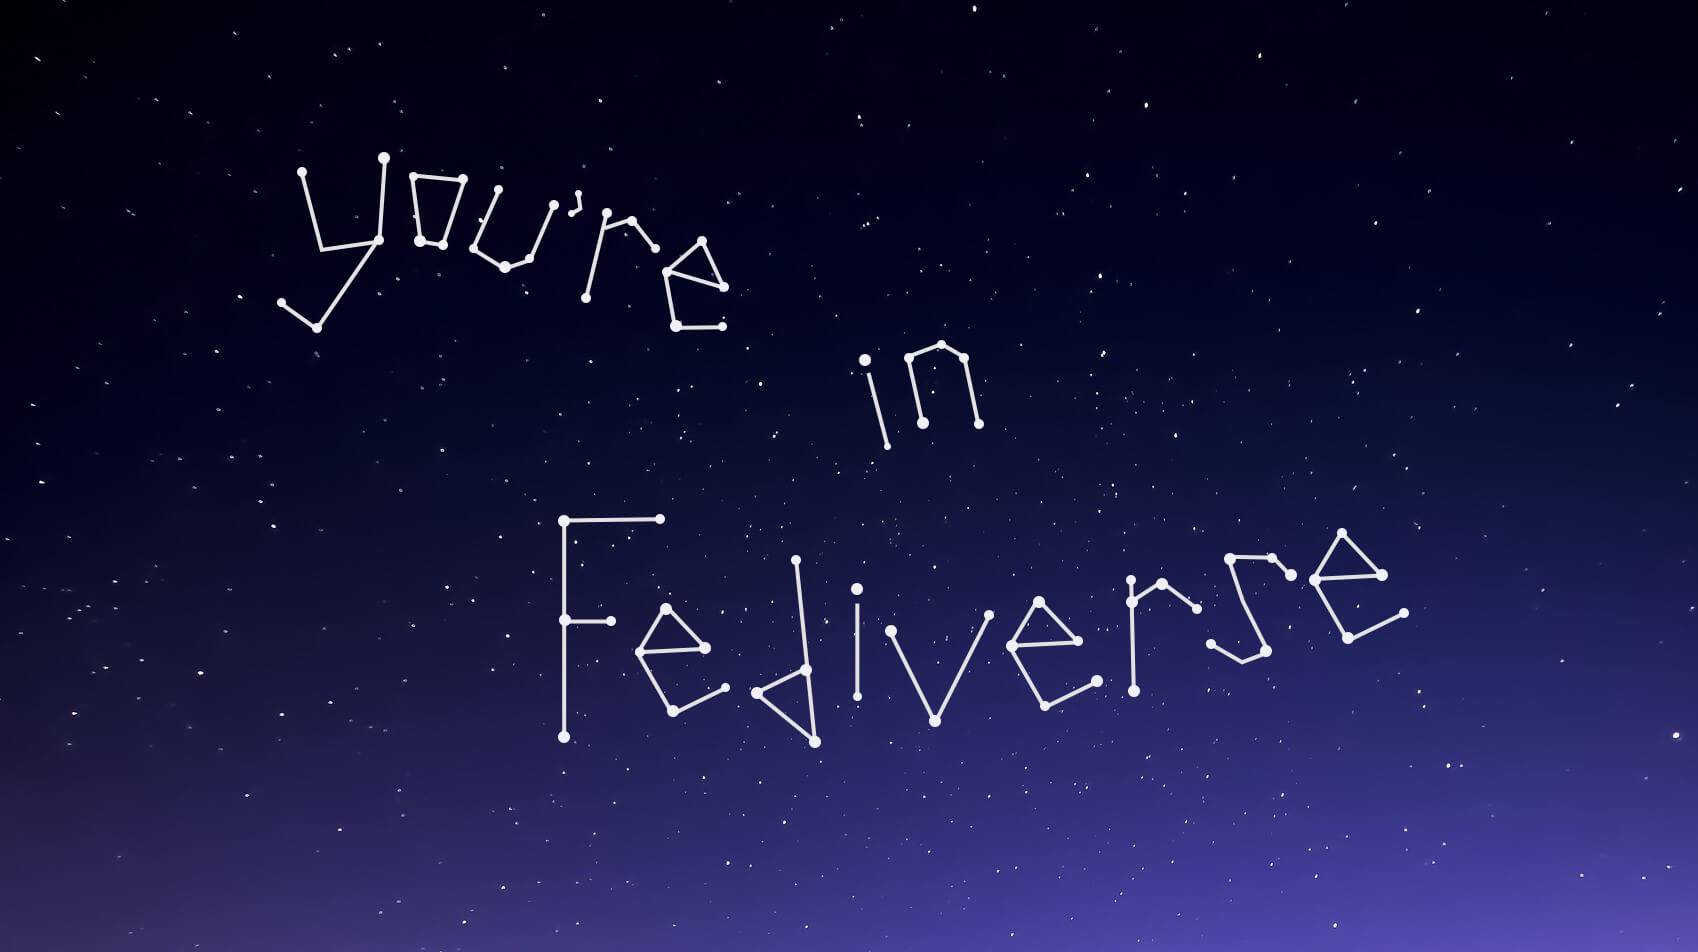 Constellation of stars forming "You're in Fediverse" phrase